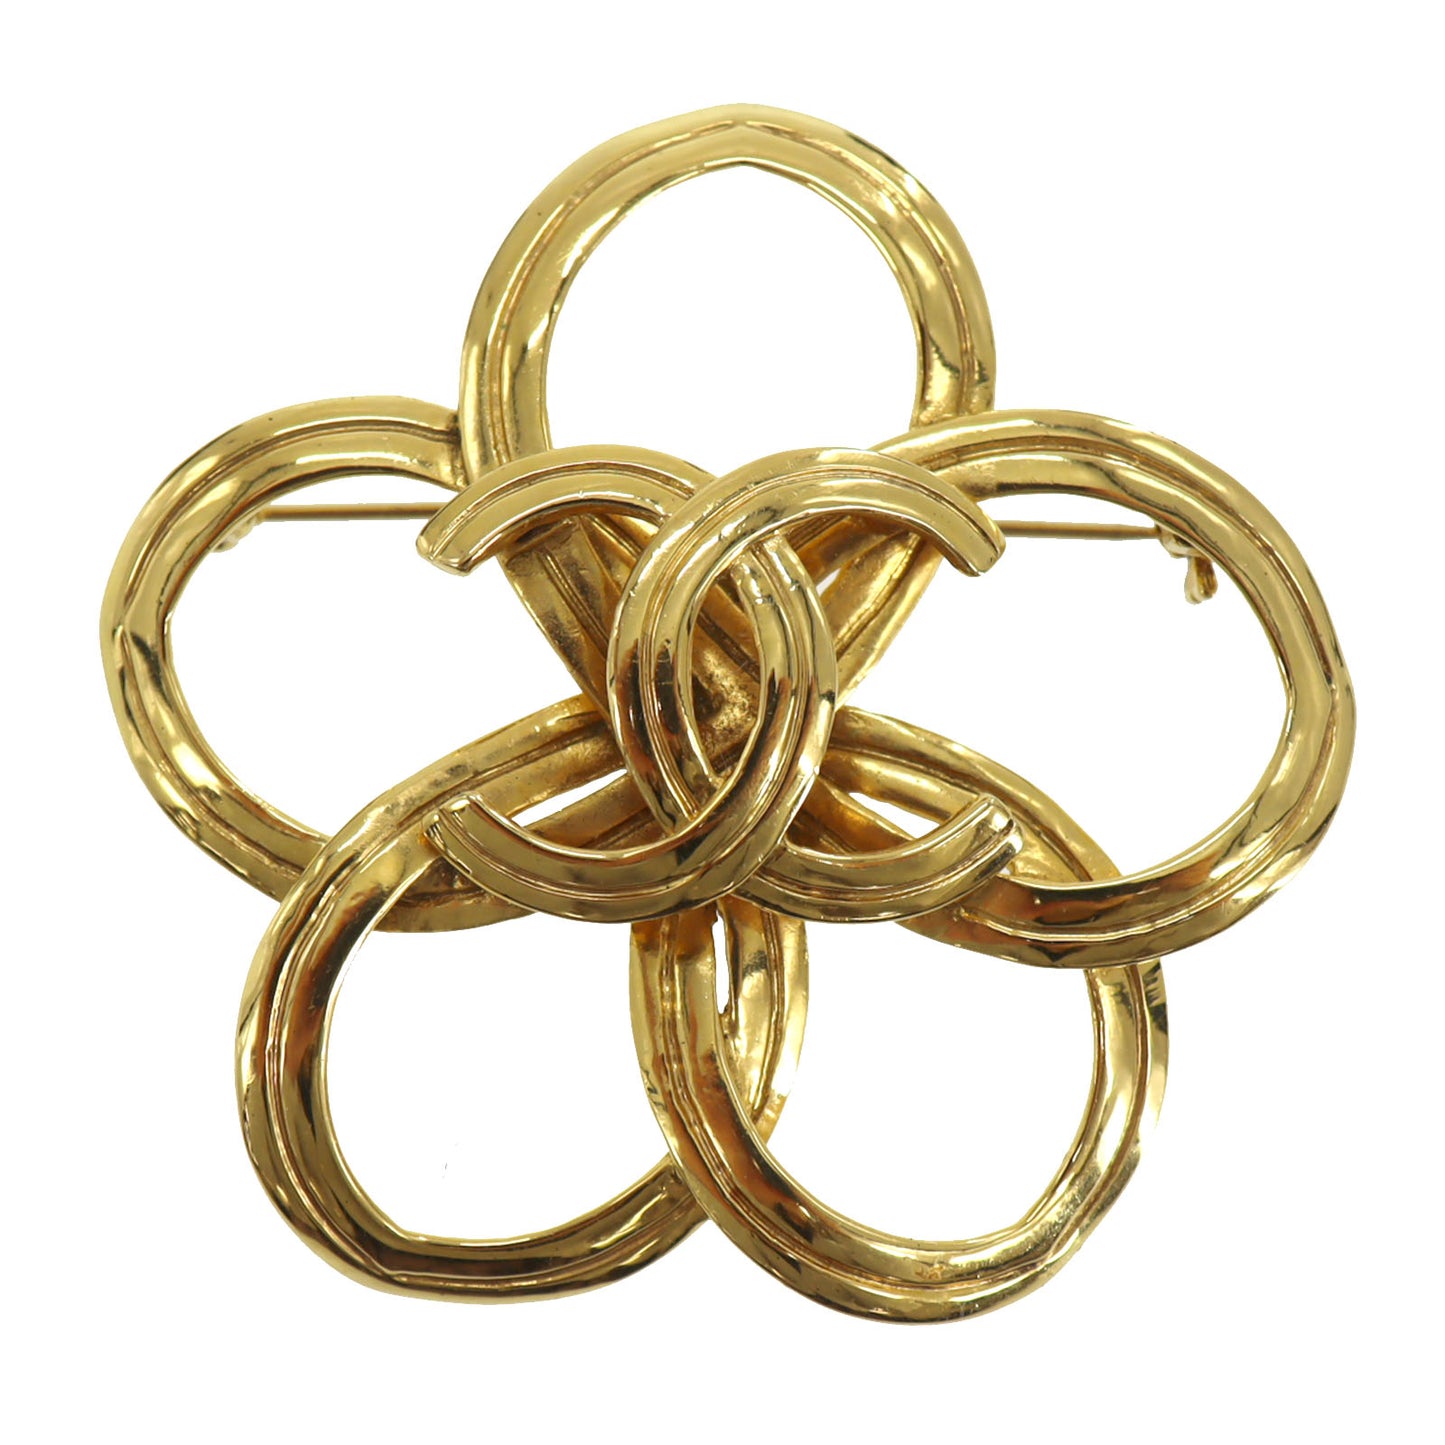 CHANEL CC Flower Pin Brooch Gold Plated 96P #CL205